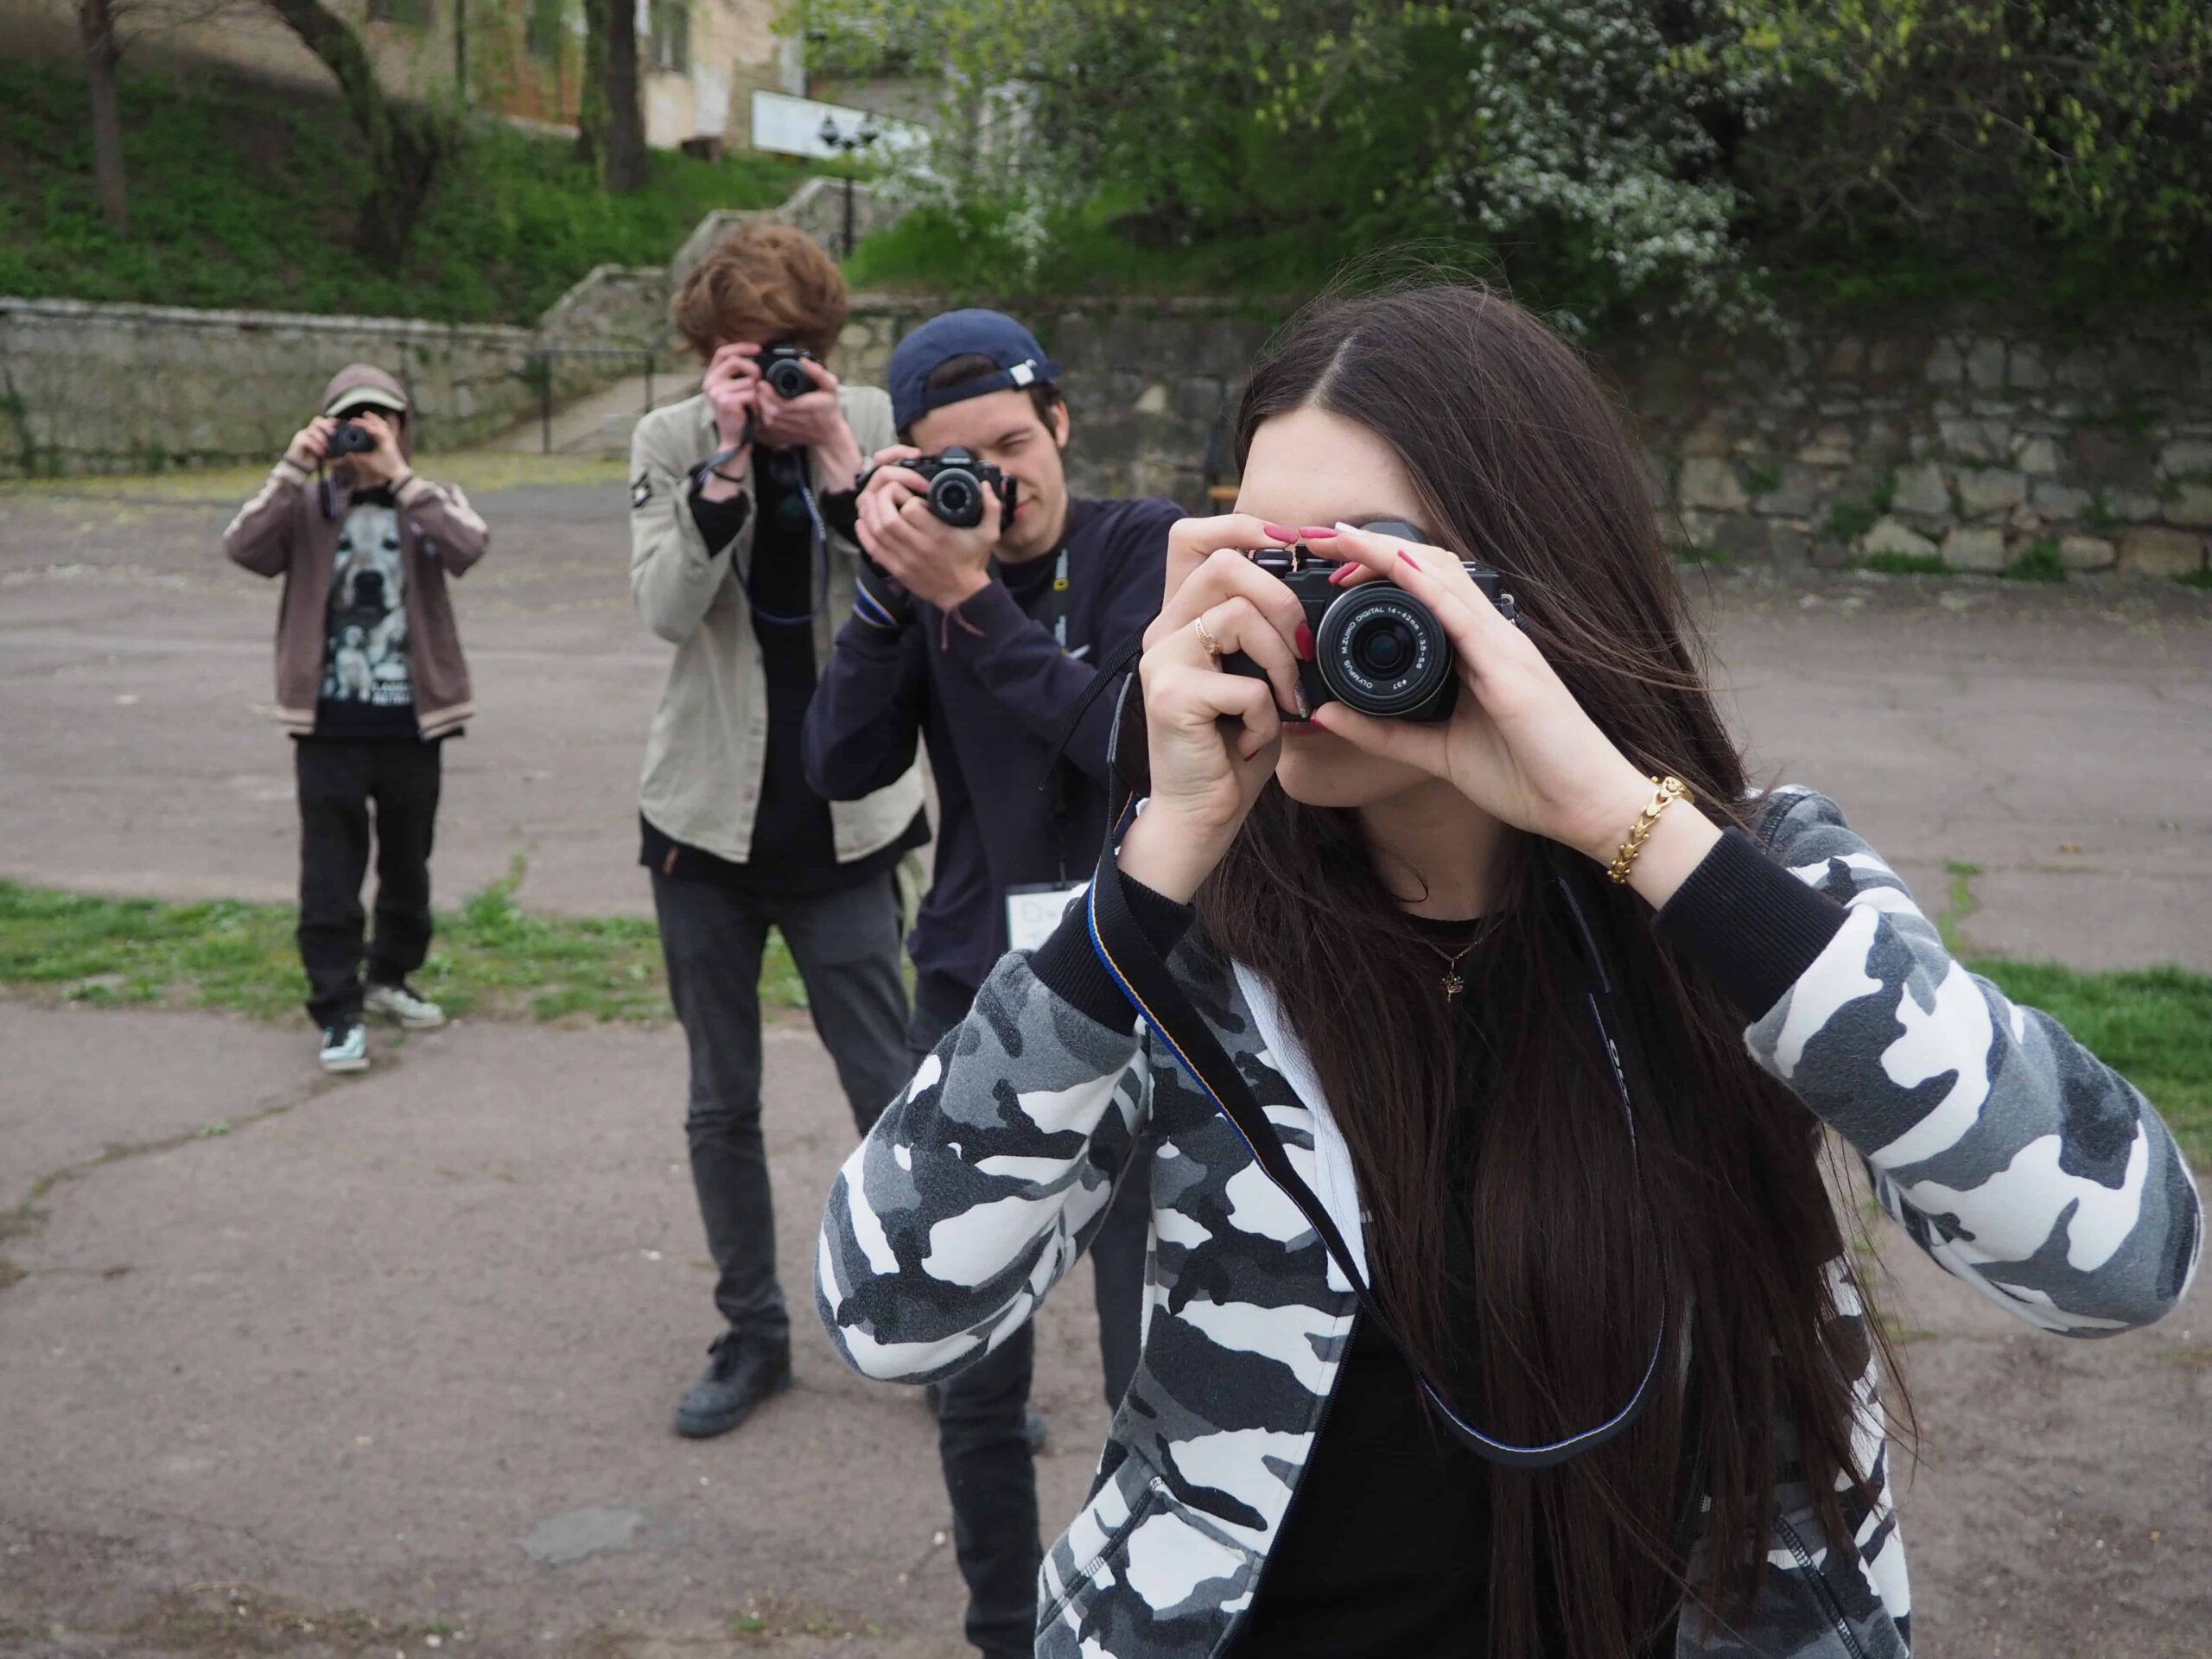 Young people using cameras.